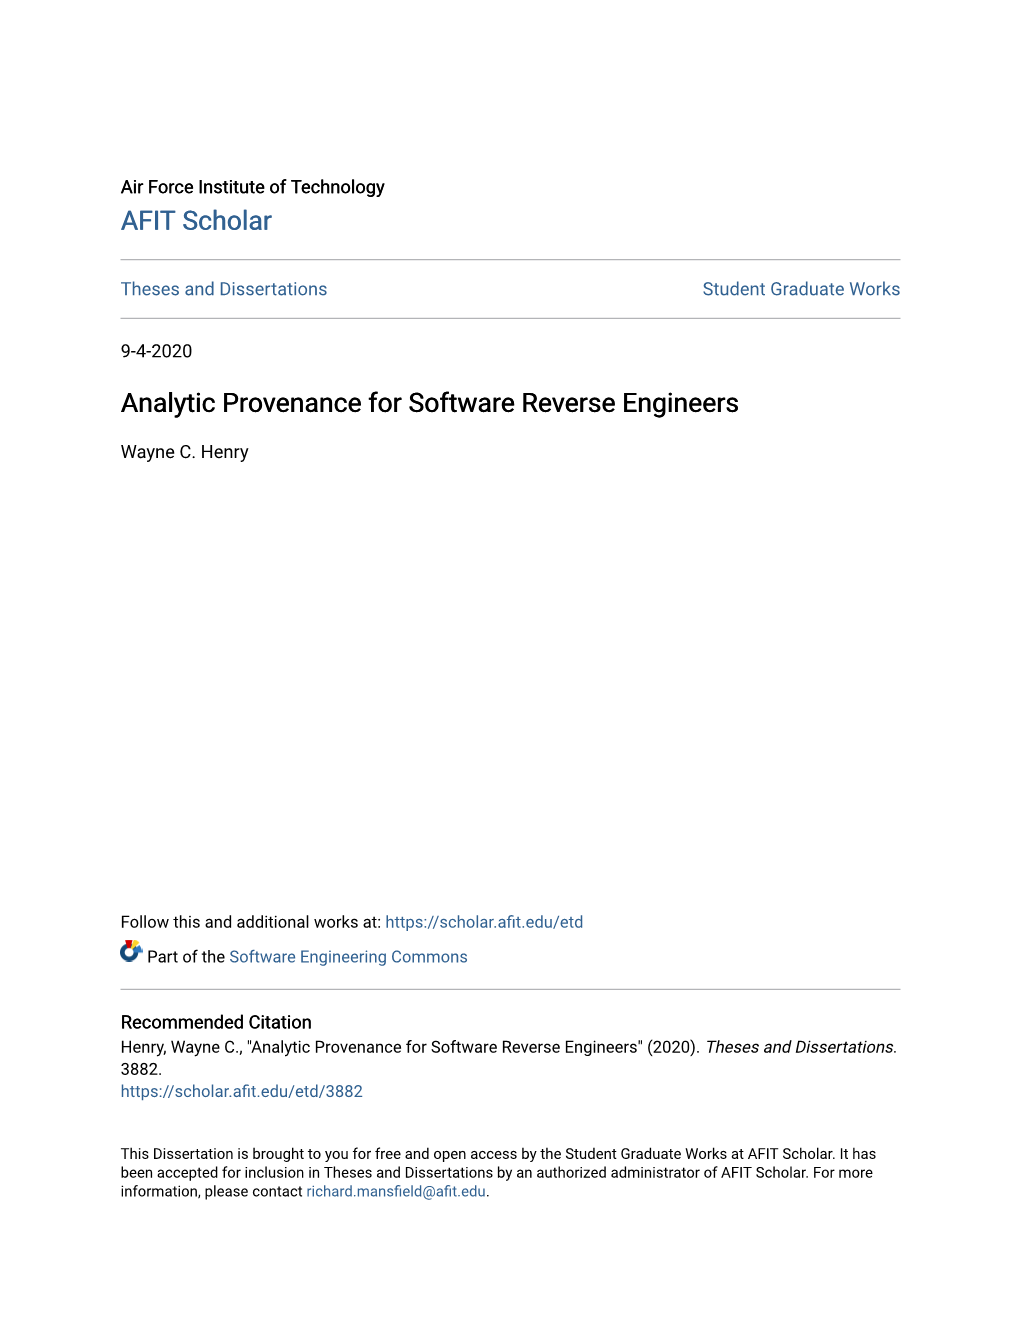 Analytic Provenance for Software Reverse Engineers